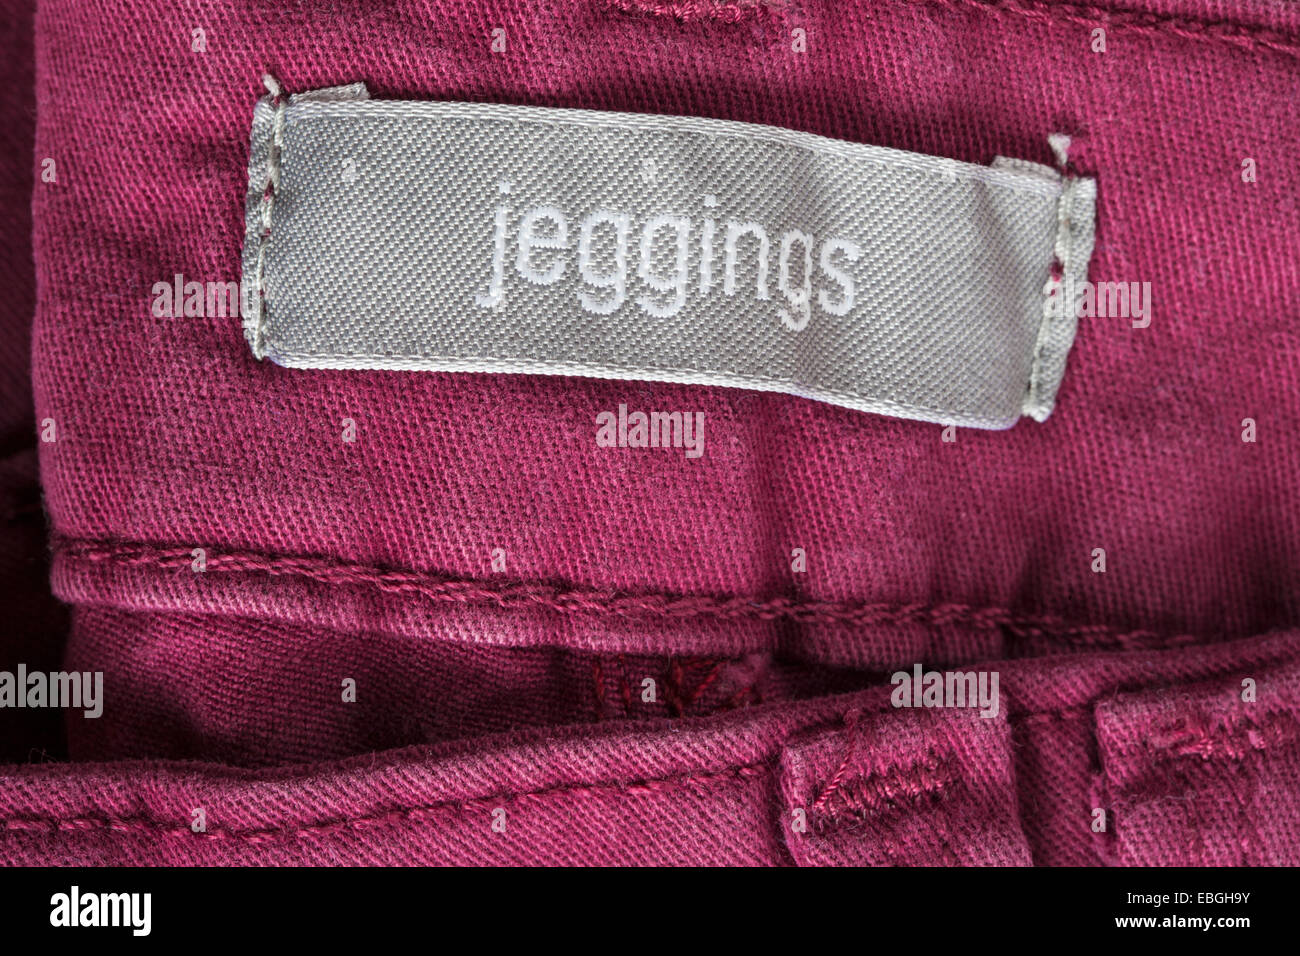 jeggings label in trousers Stock Photo